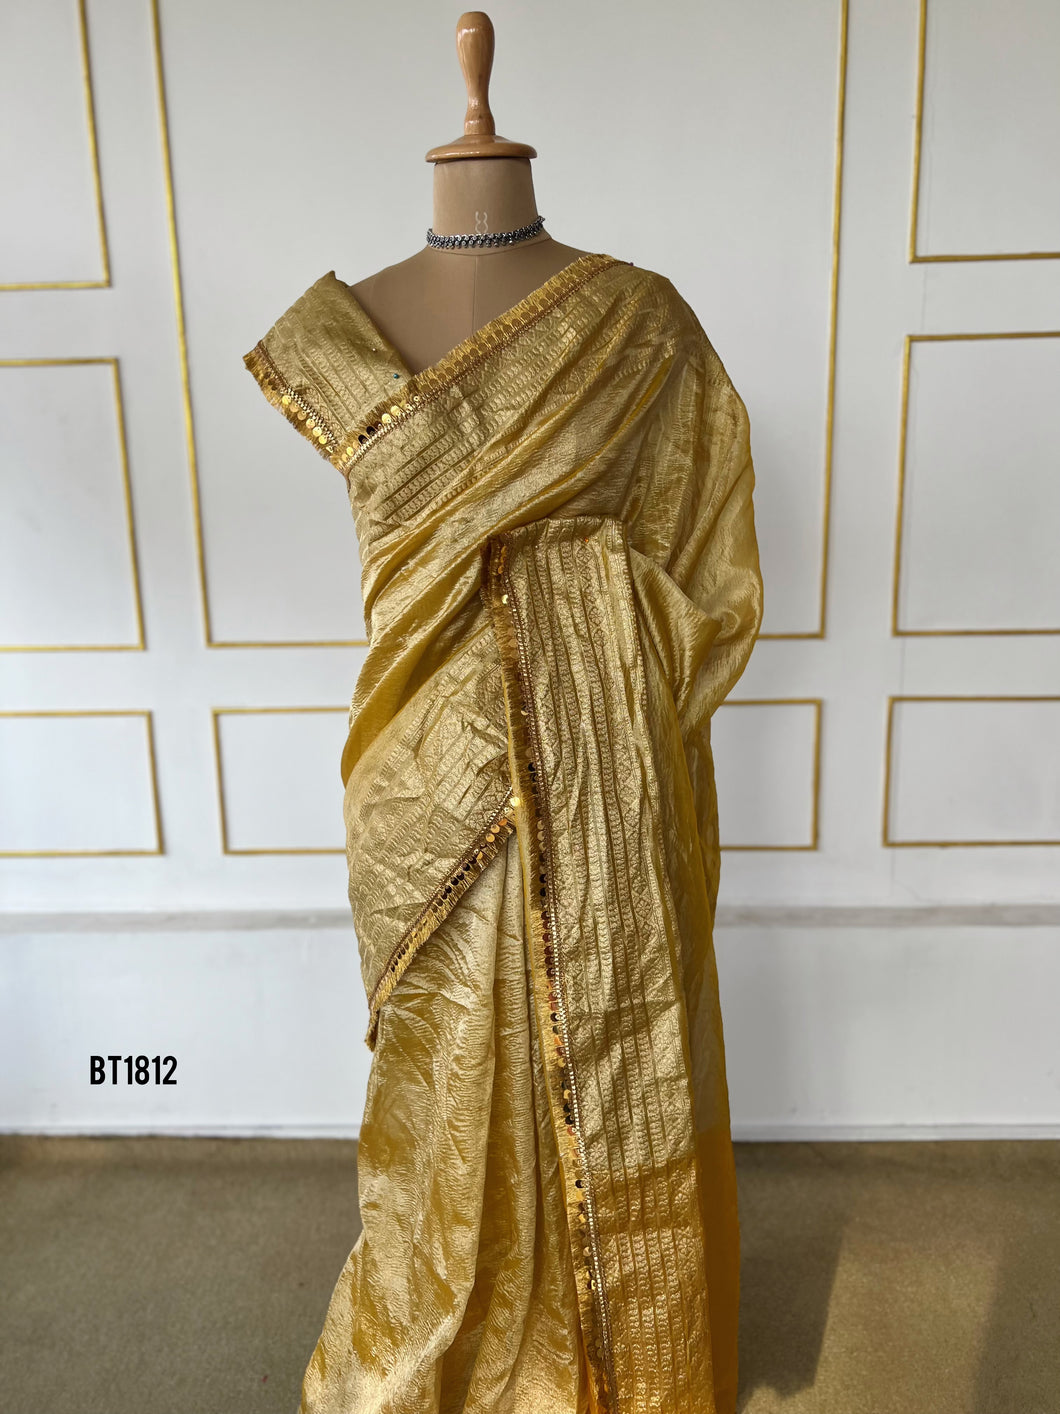 BT1812 Customisable Crushed Tissue Saree For Mom